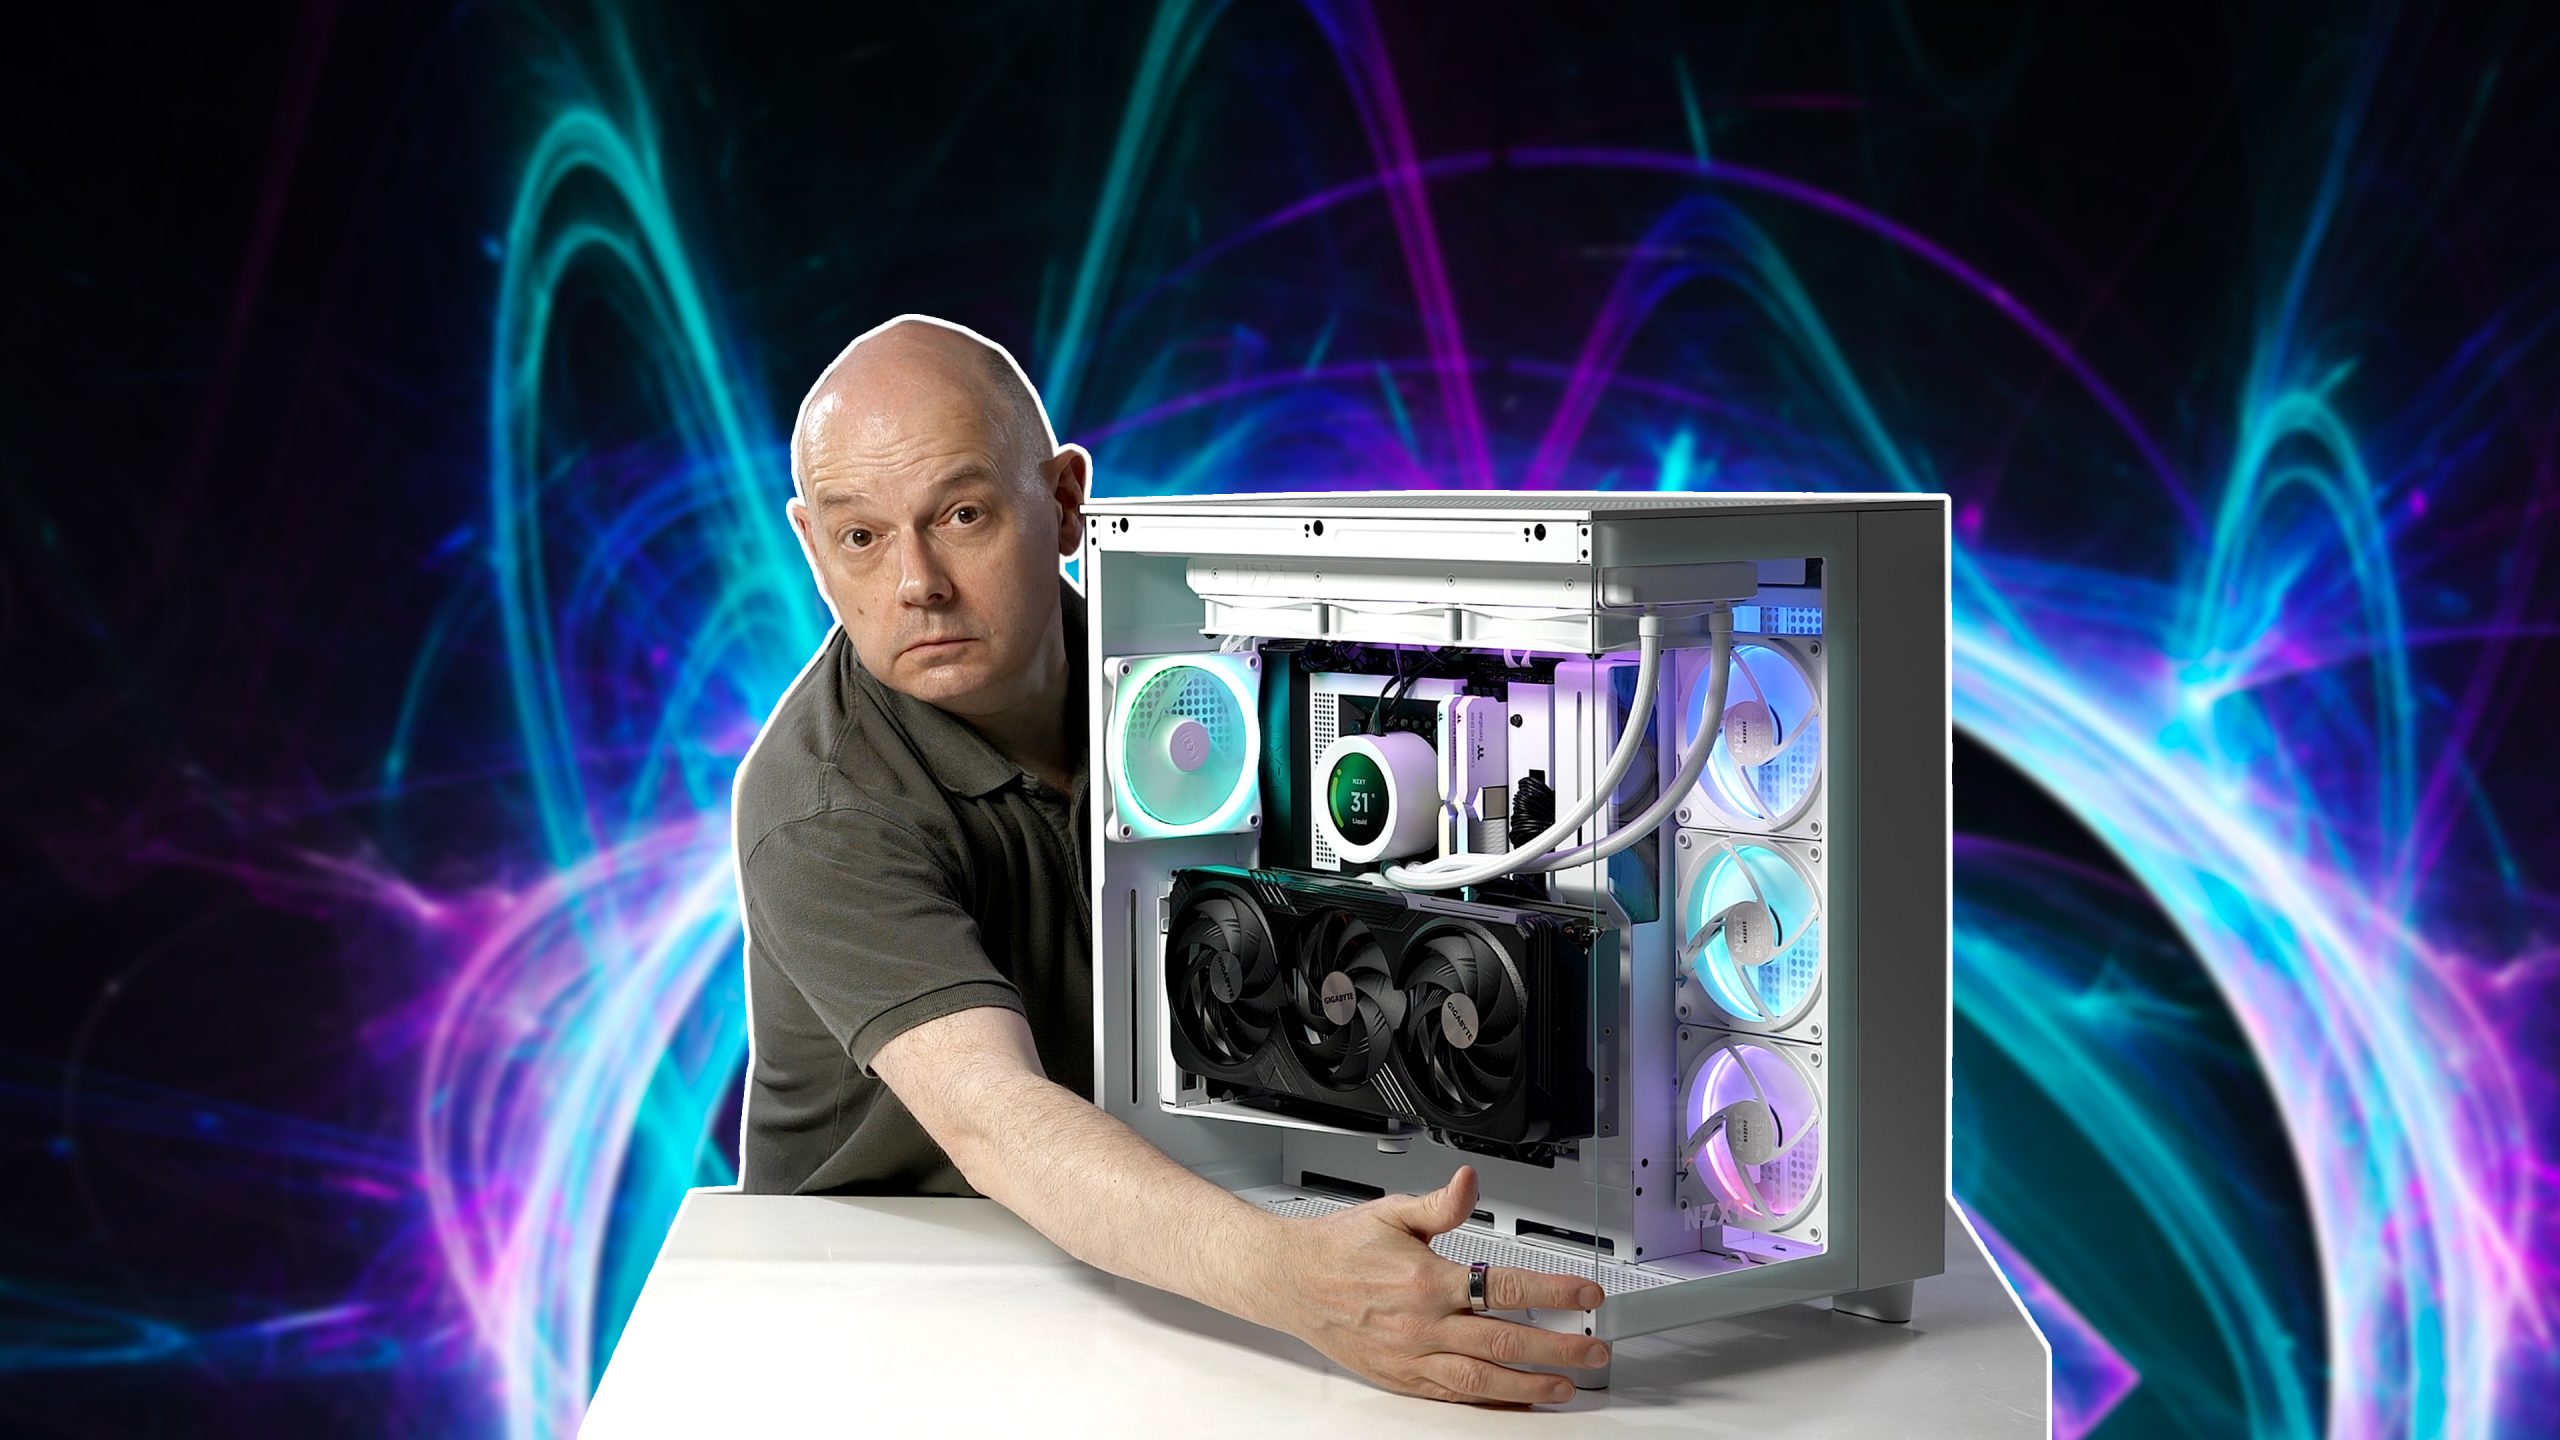 White Gaming PC Build in NZXT H9 Flow with 10 Lian-Li RGB fans! by